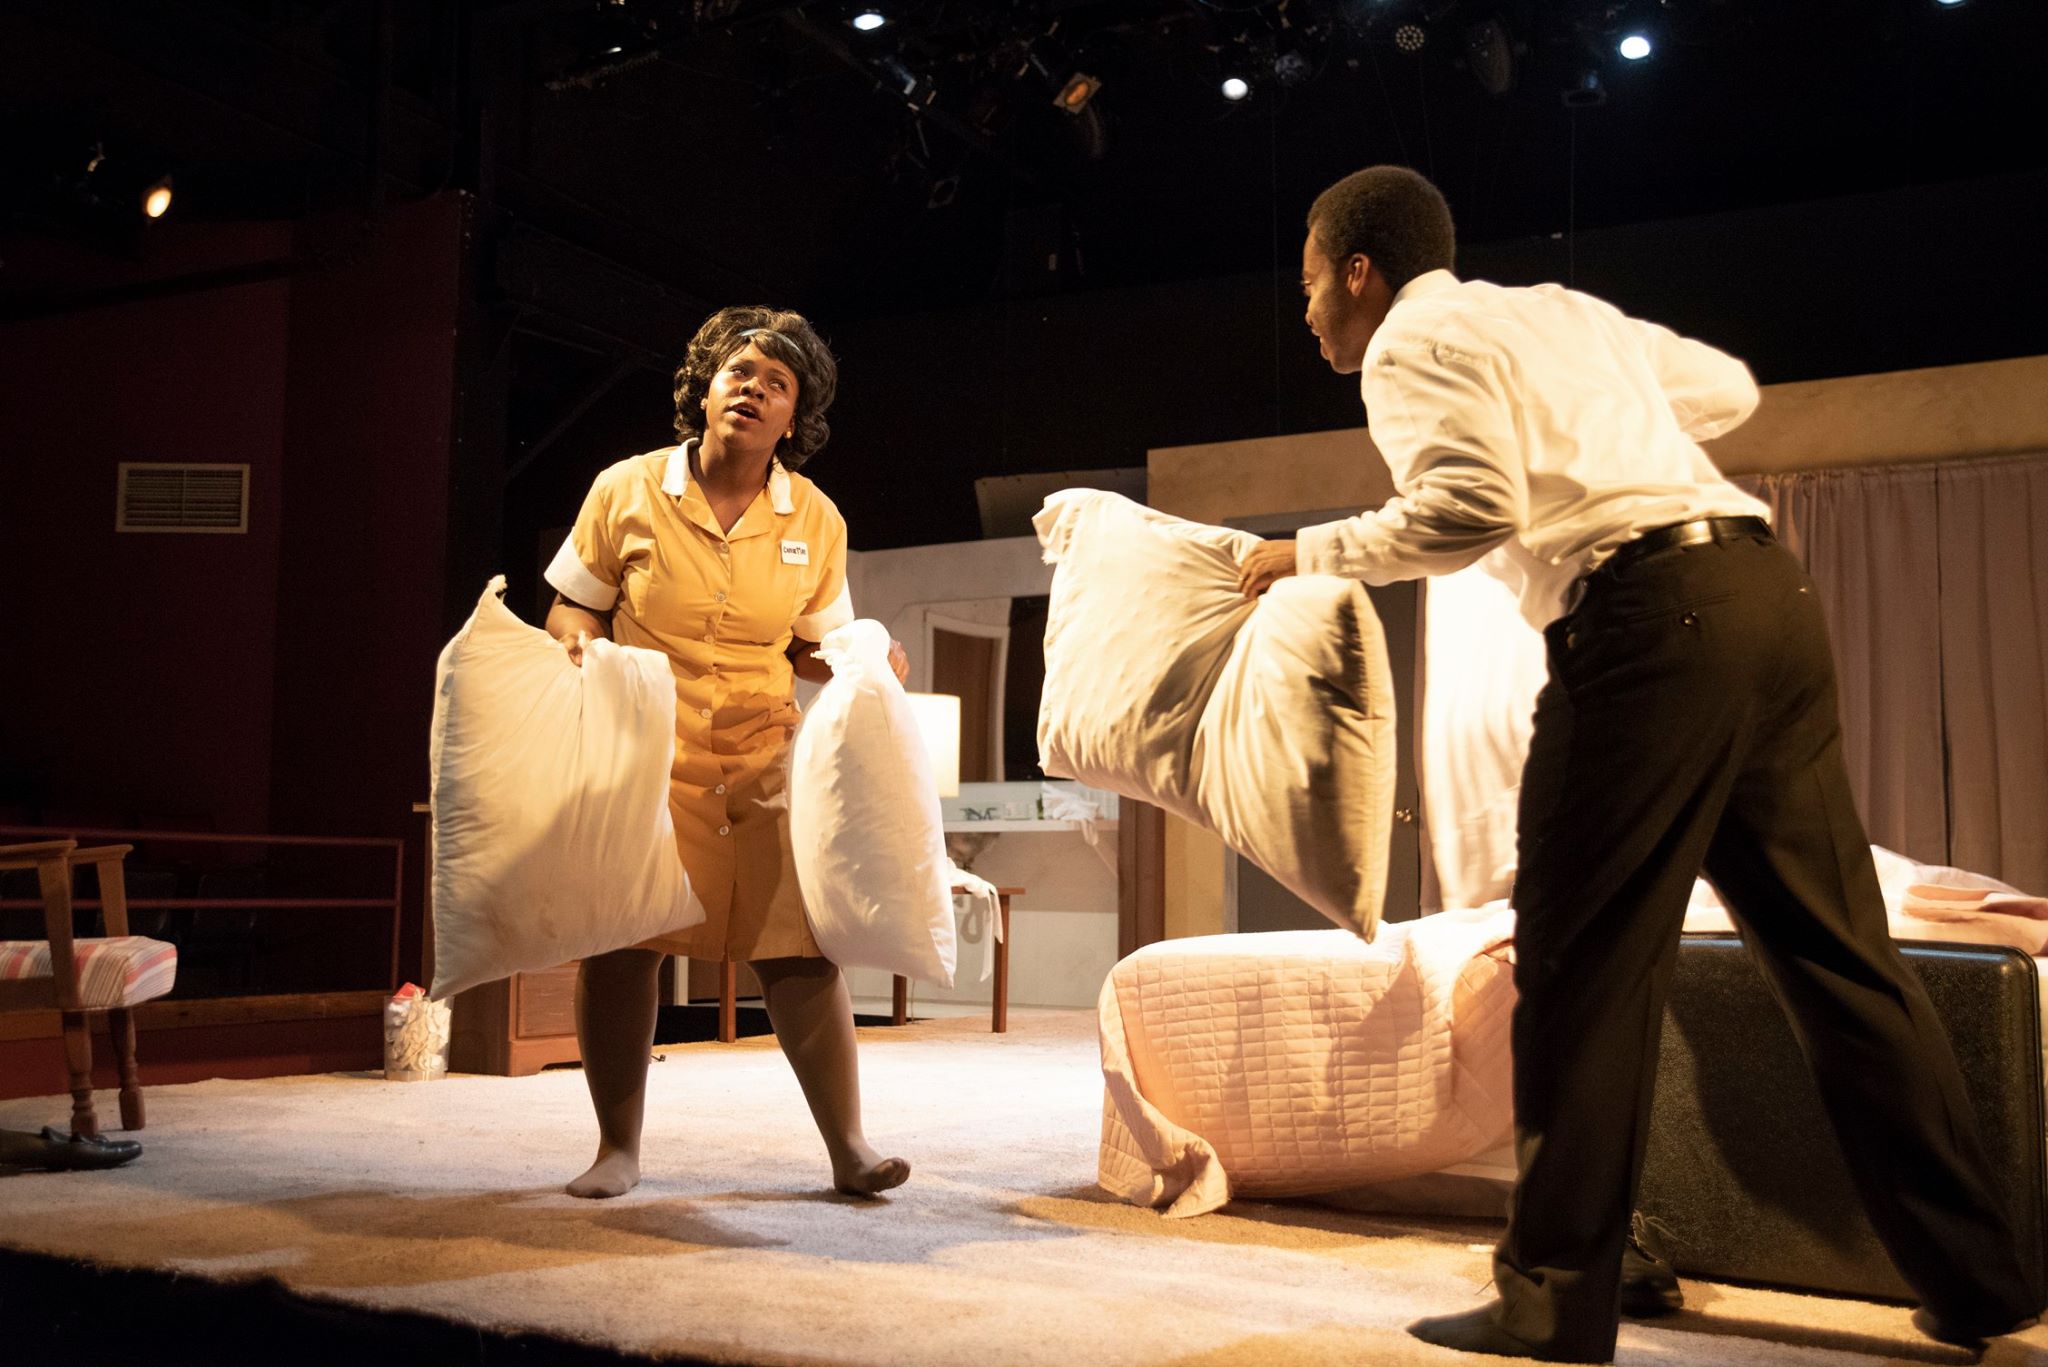 UofL alumni LaShondra Hood and Xavier Harris in The Mountaintop by Katori Hall. The Mountaintop was performed last year on campus and at the 2019 National Black Theatre Festival in Winston Salem, NC.